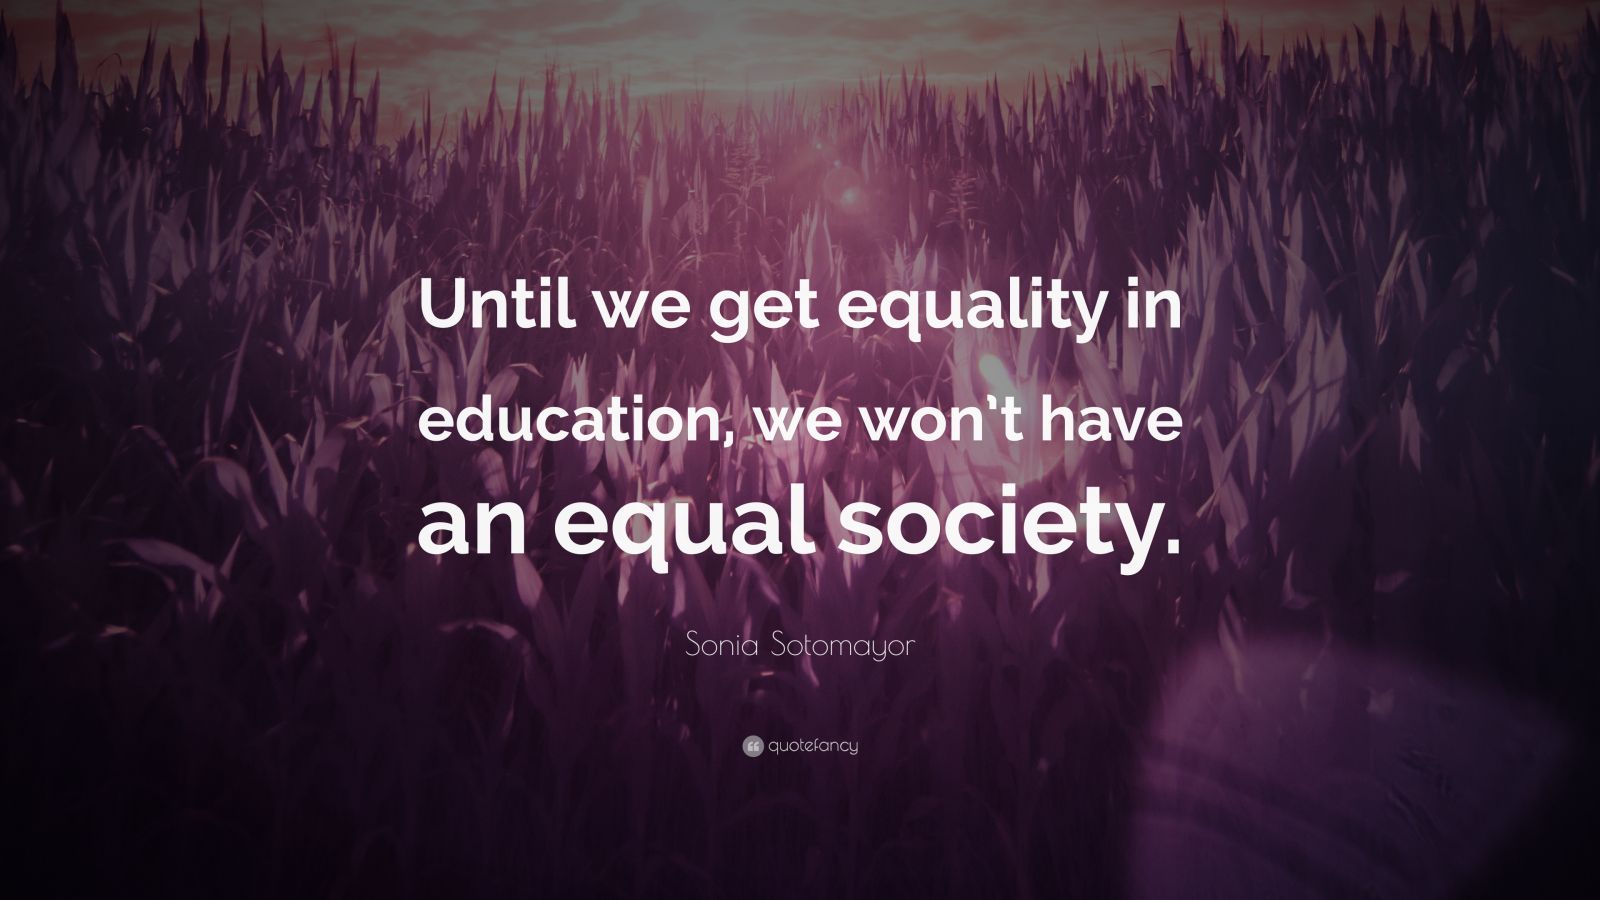 Sonia Sotomayor Quote “Until we get equality in education